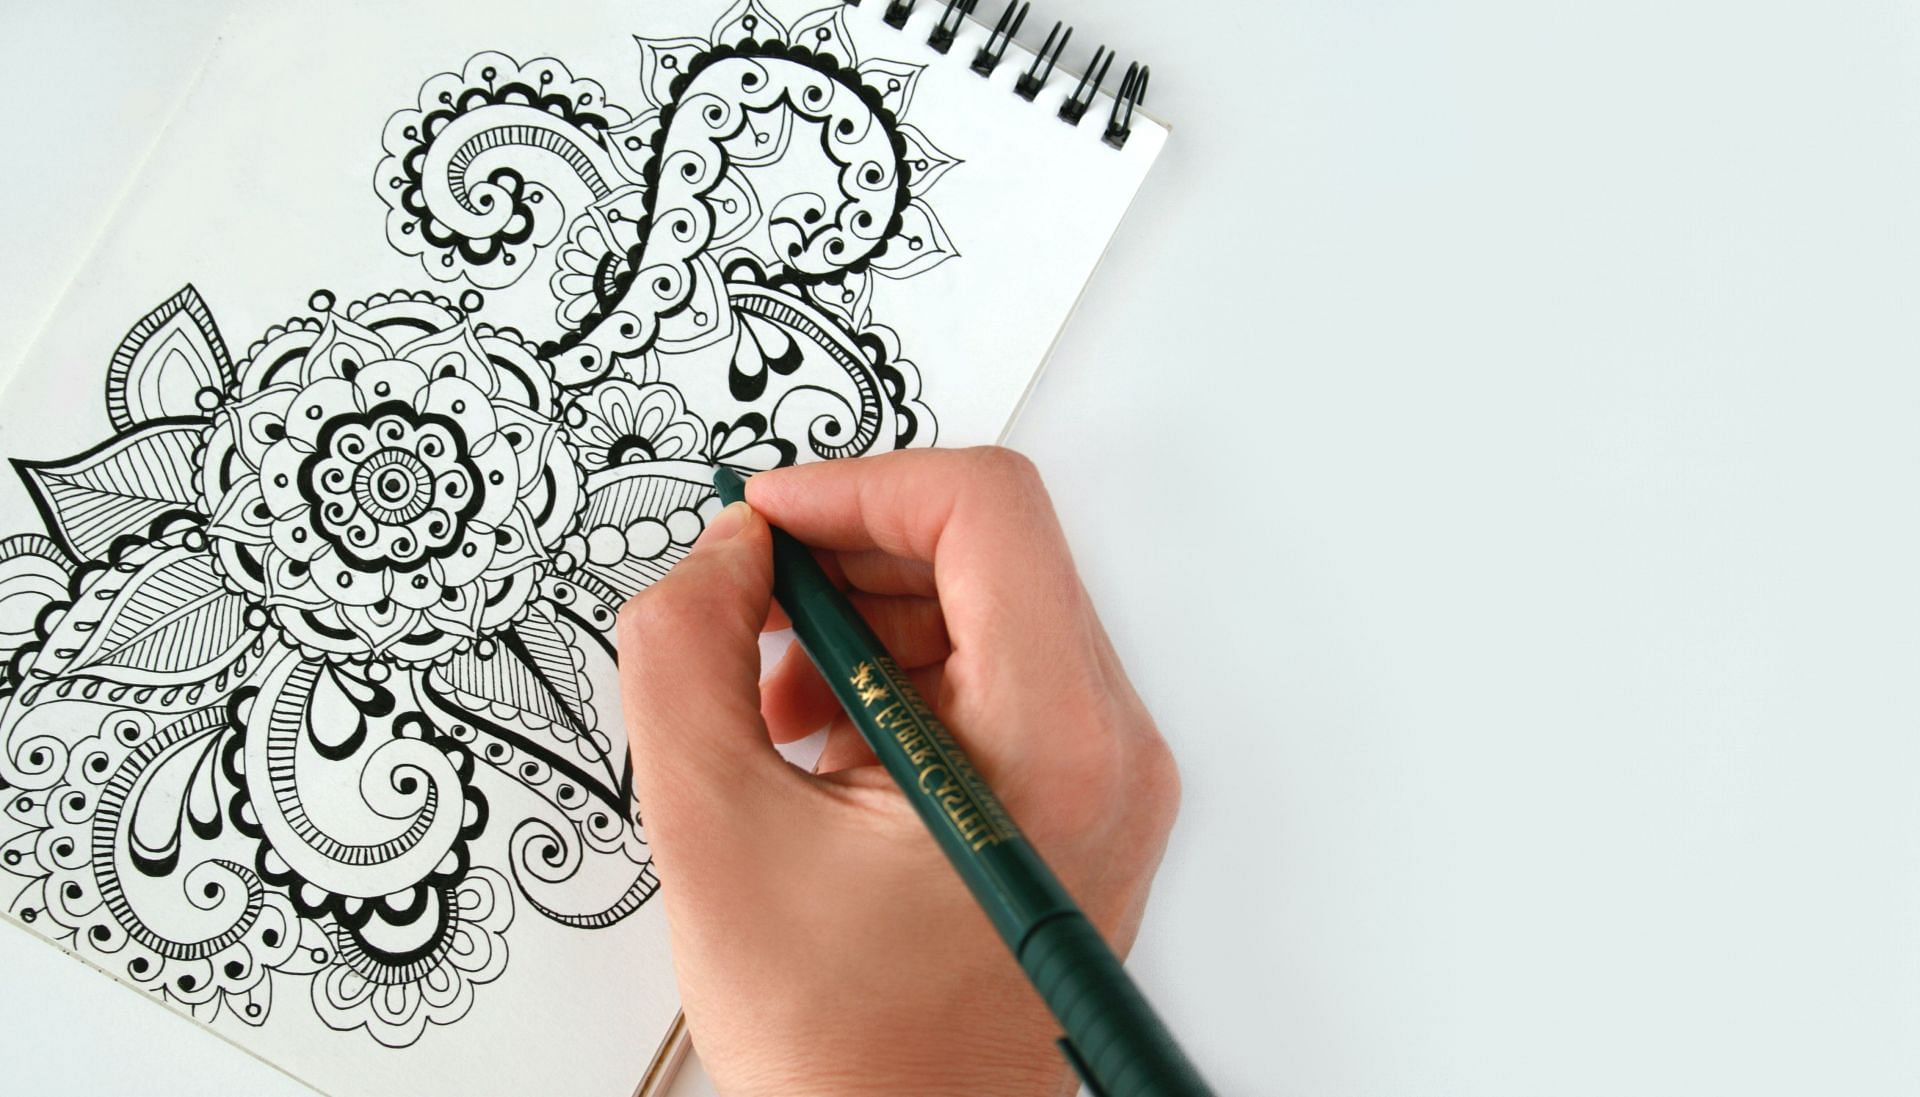 Doodling enhances focus, concentration and overall thinking skills. (Image via Pexels/ Alena Koval)